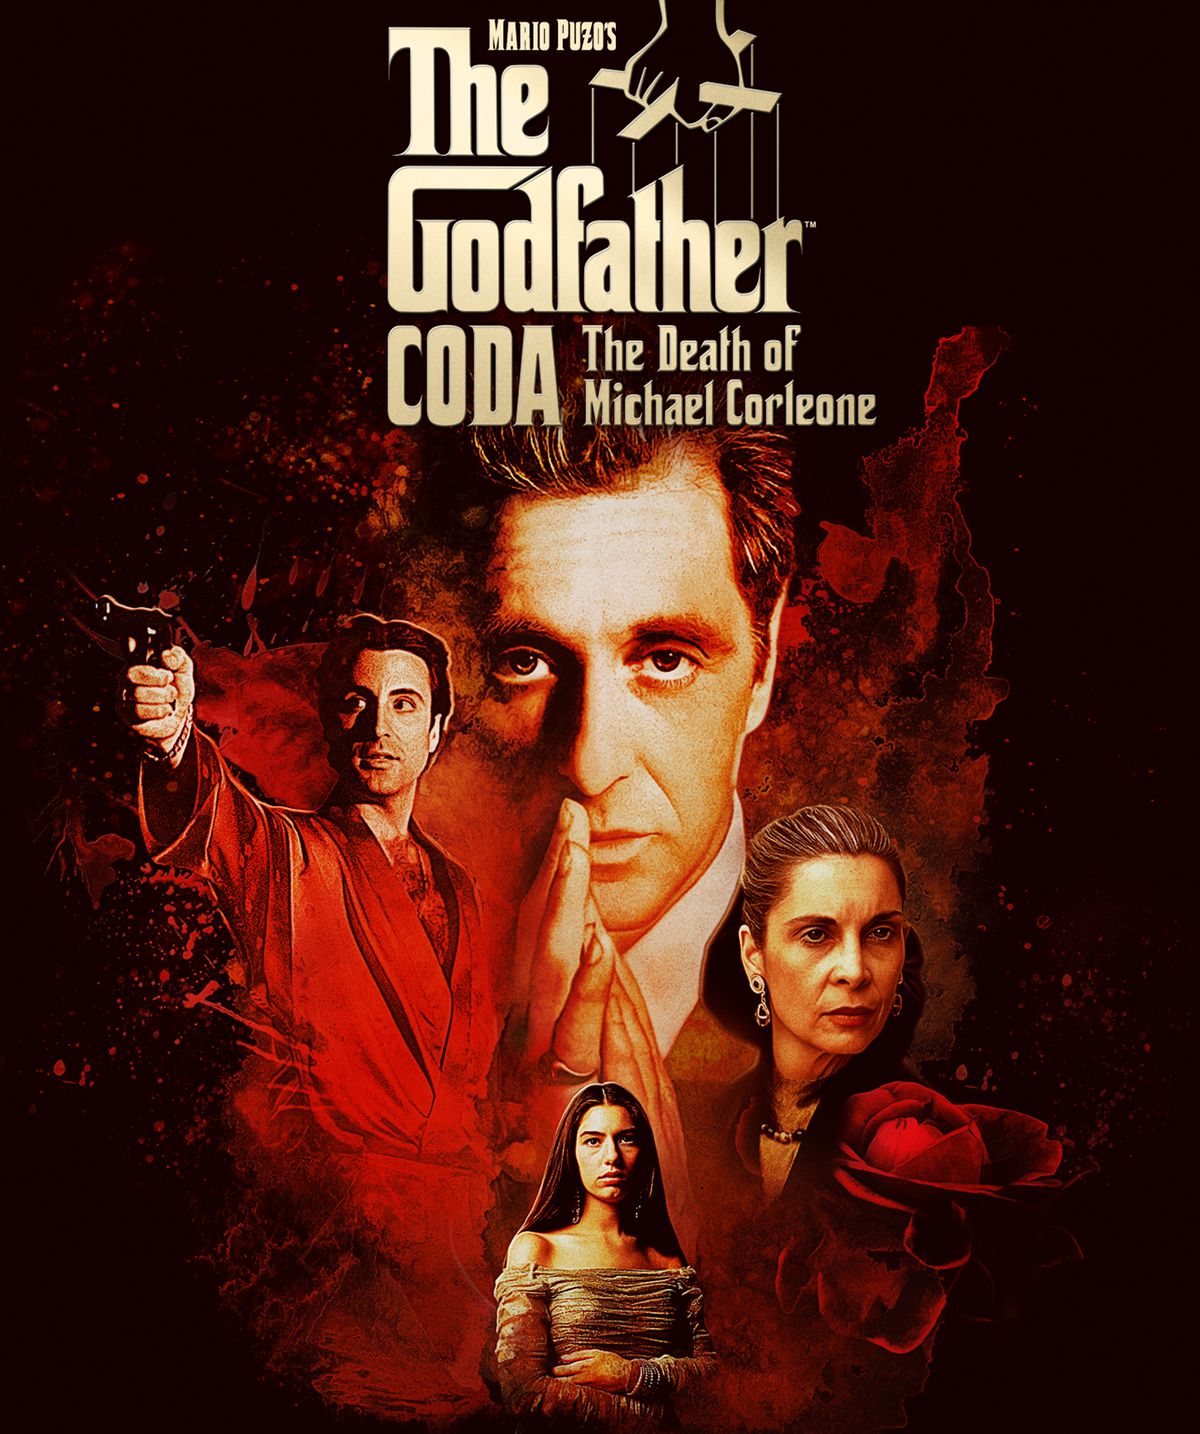 The Godfather 3 re-edit aka The Godfather, Coda: The Death of Michael Corleone poster